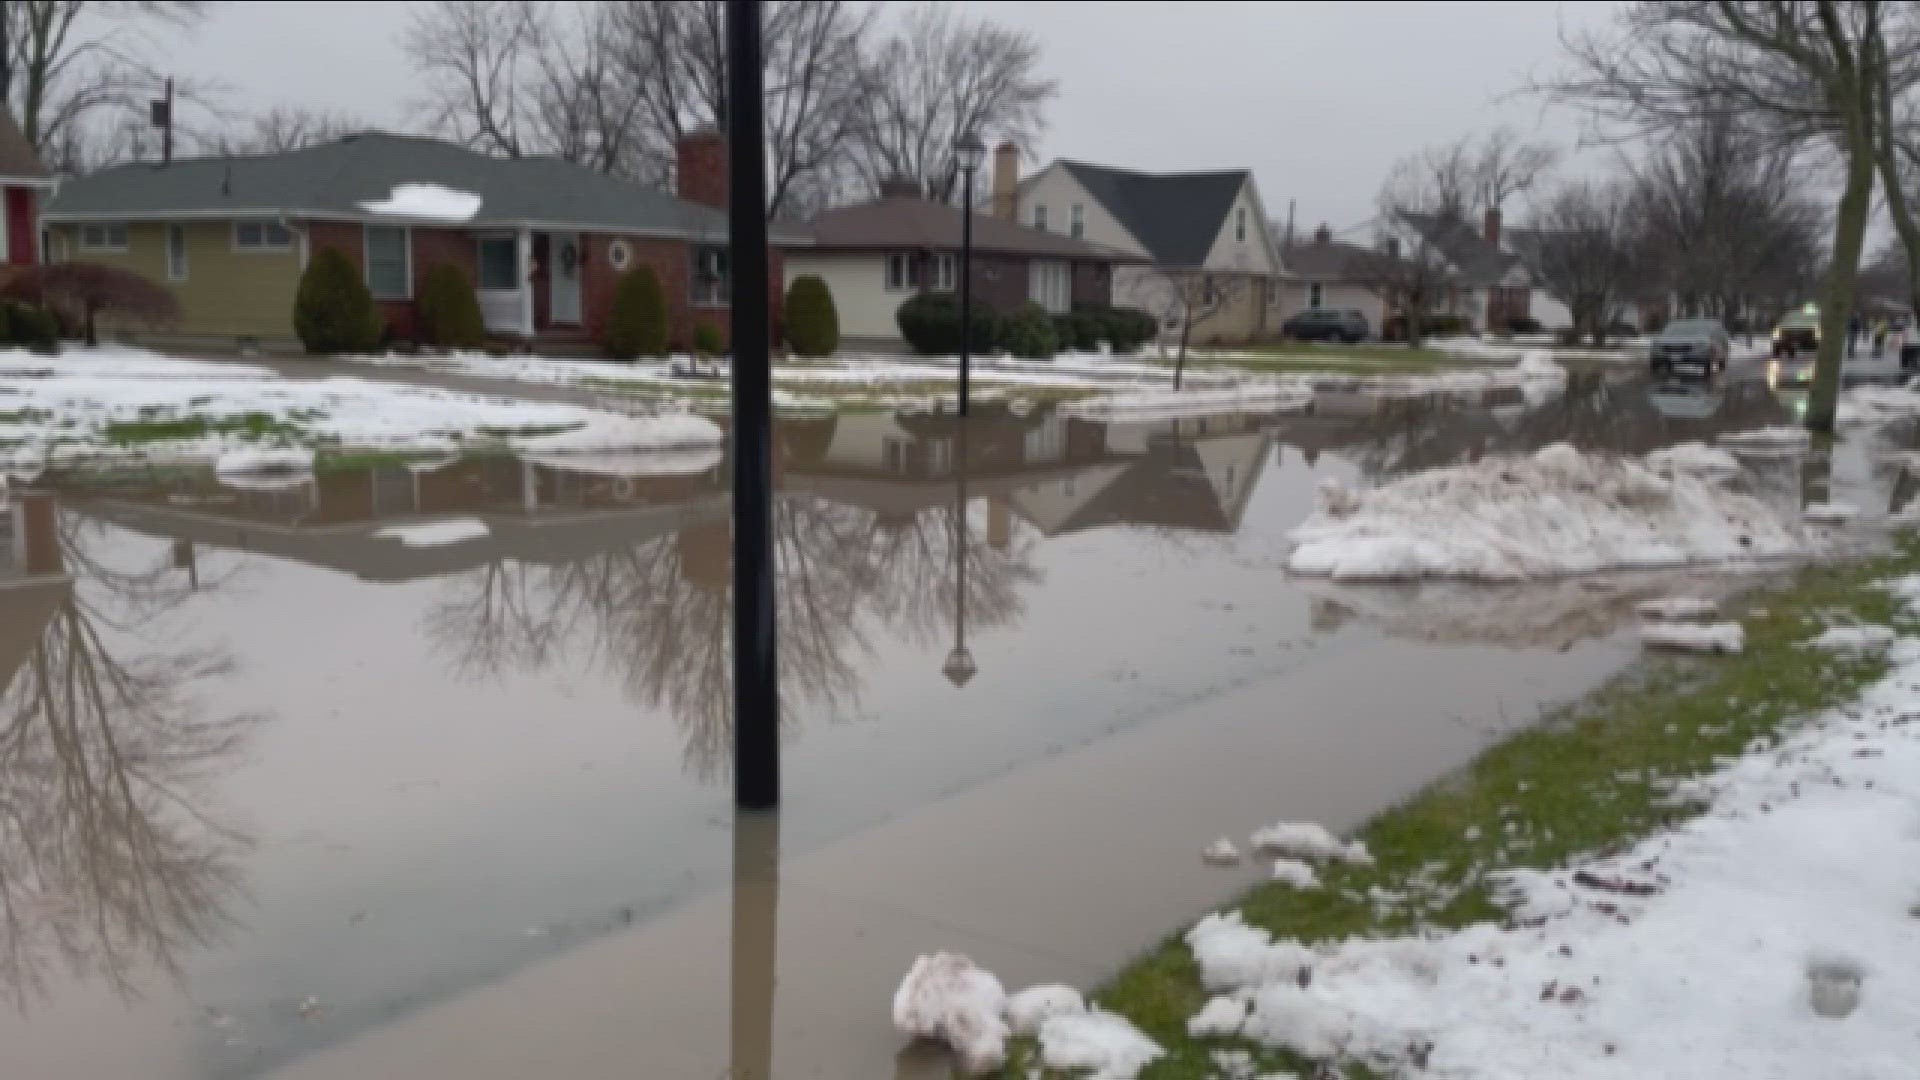 This was the scene just after 7 o'clock this morning in Tonawanda they get a lot of calls for flooded basements